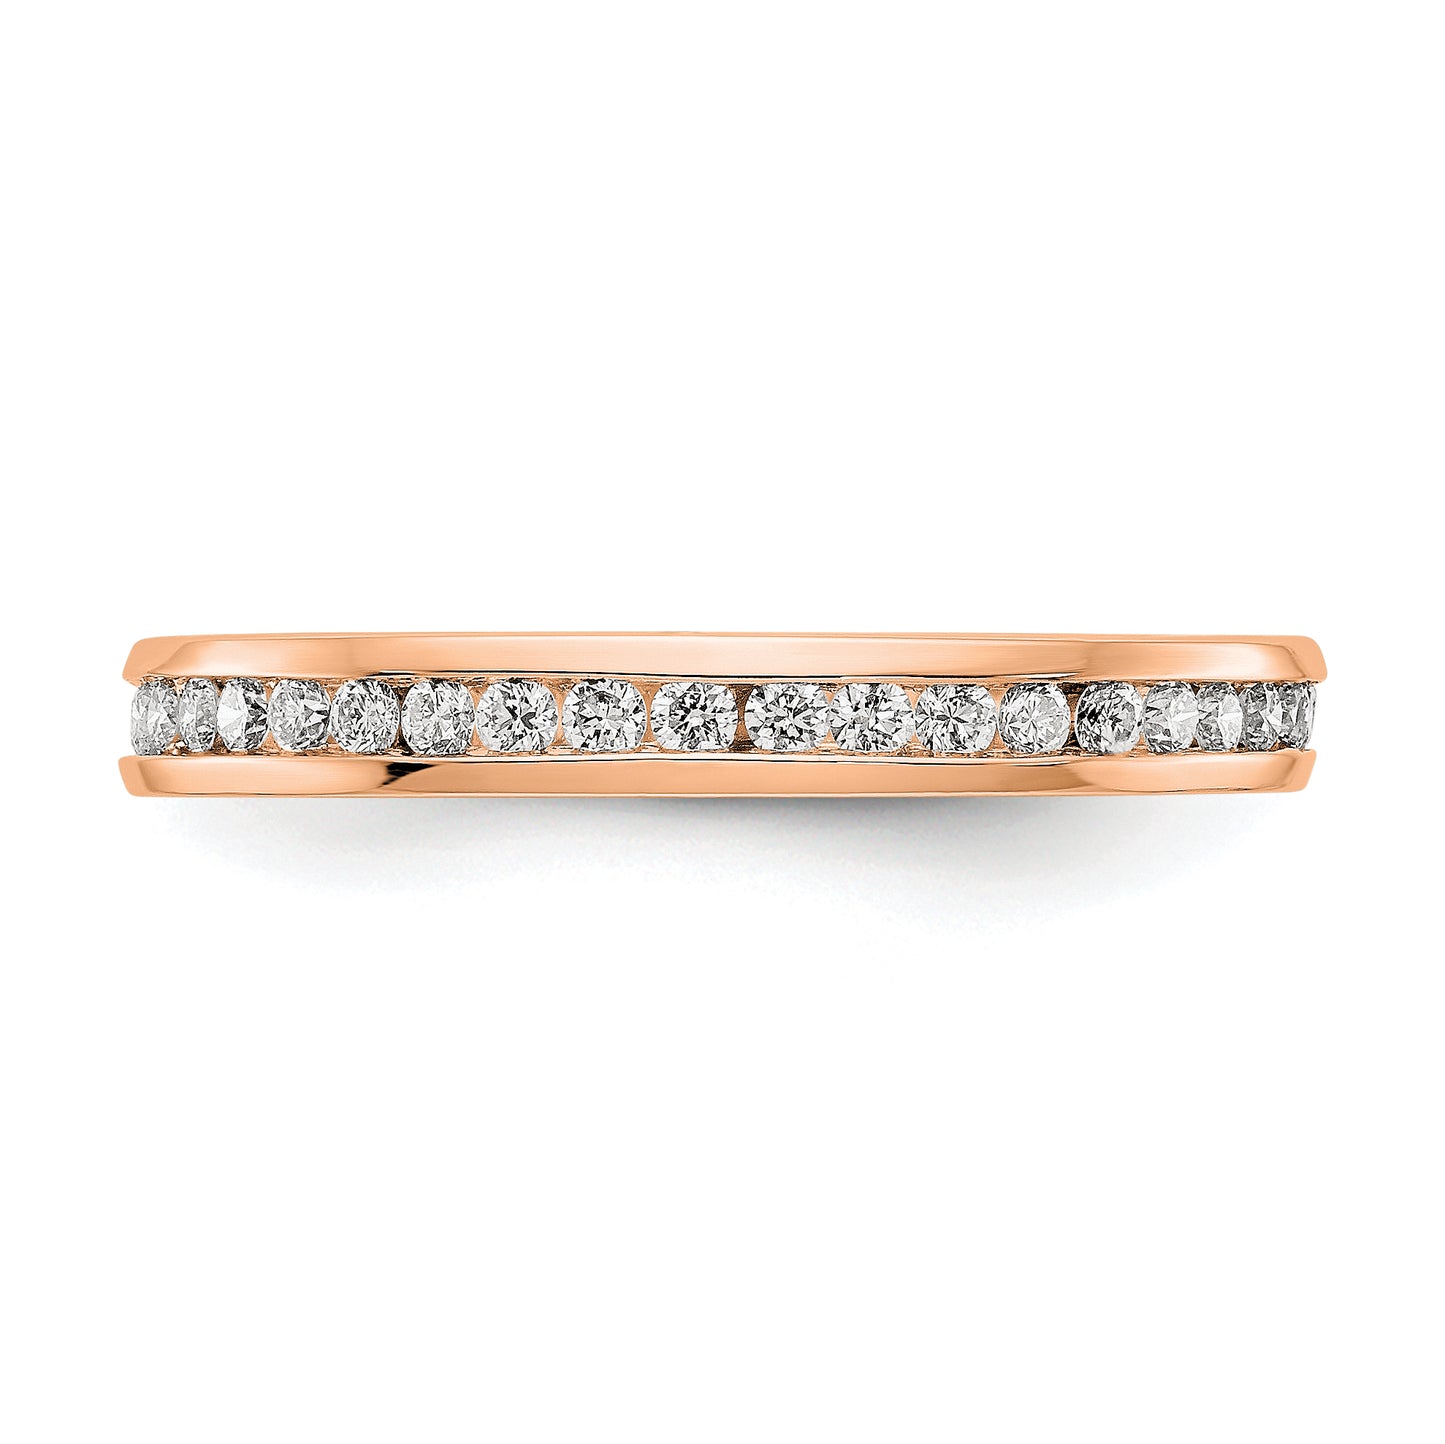 Solid Real 14k Rose Gold Polished 1/2ct Channel Set CZ Eternity Wedding Band Ring